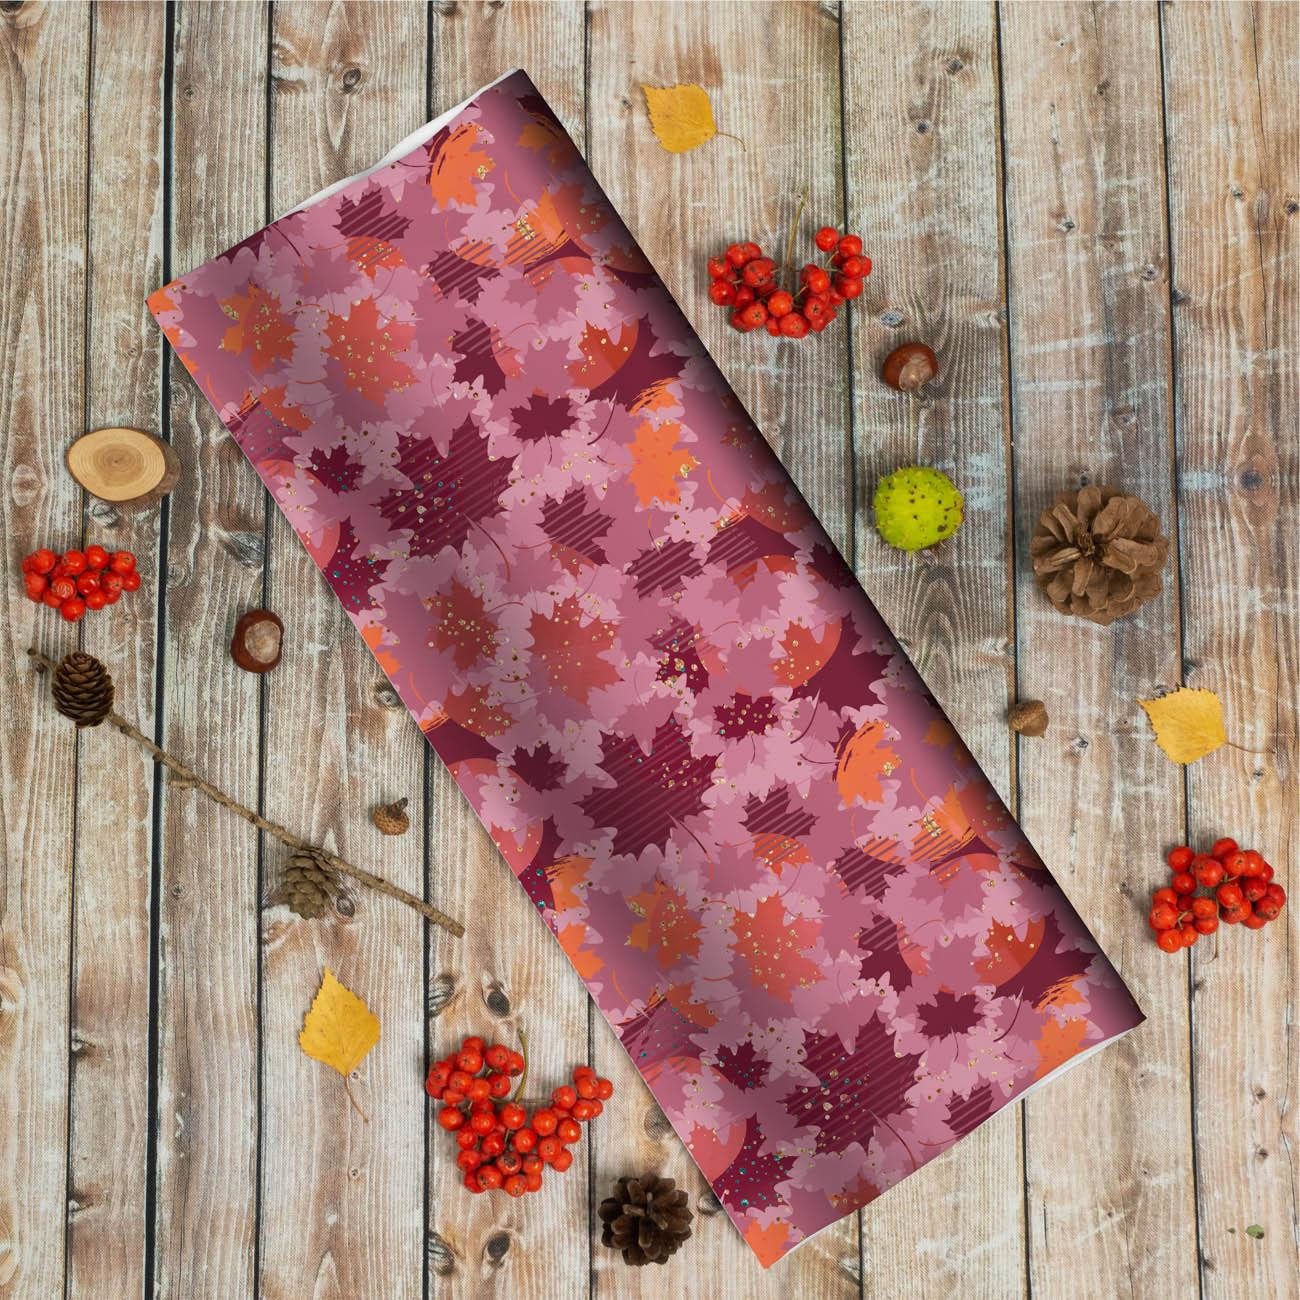 PINK LEAVES (GLITTER AUTUMN) - brushed knit fabric with teddy / alpine fleece